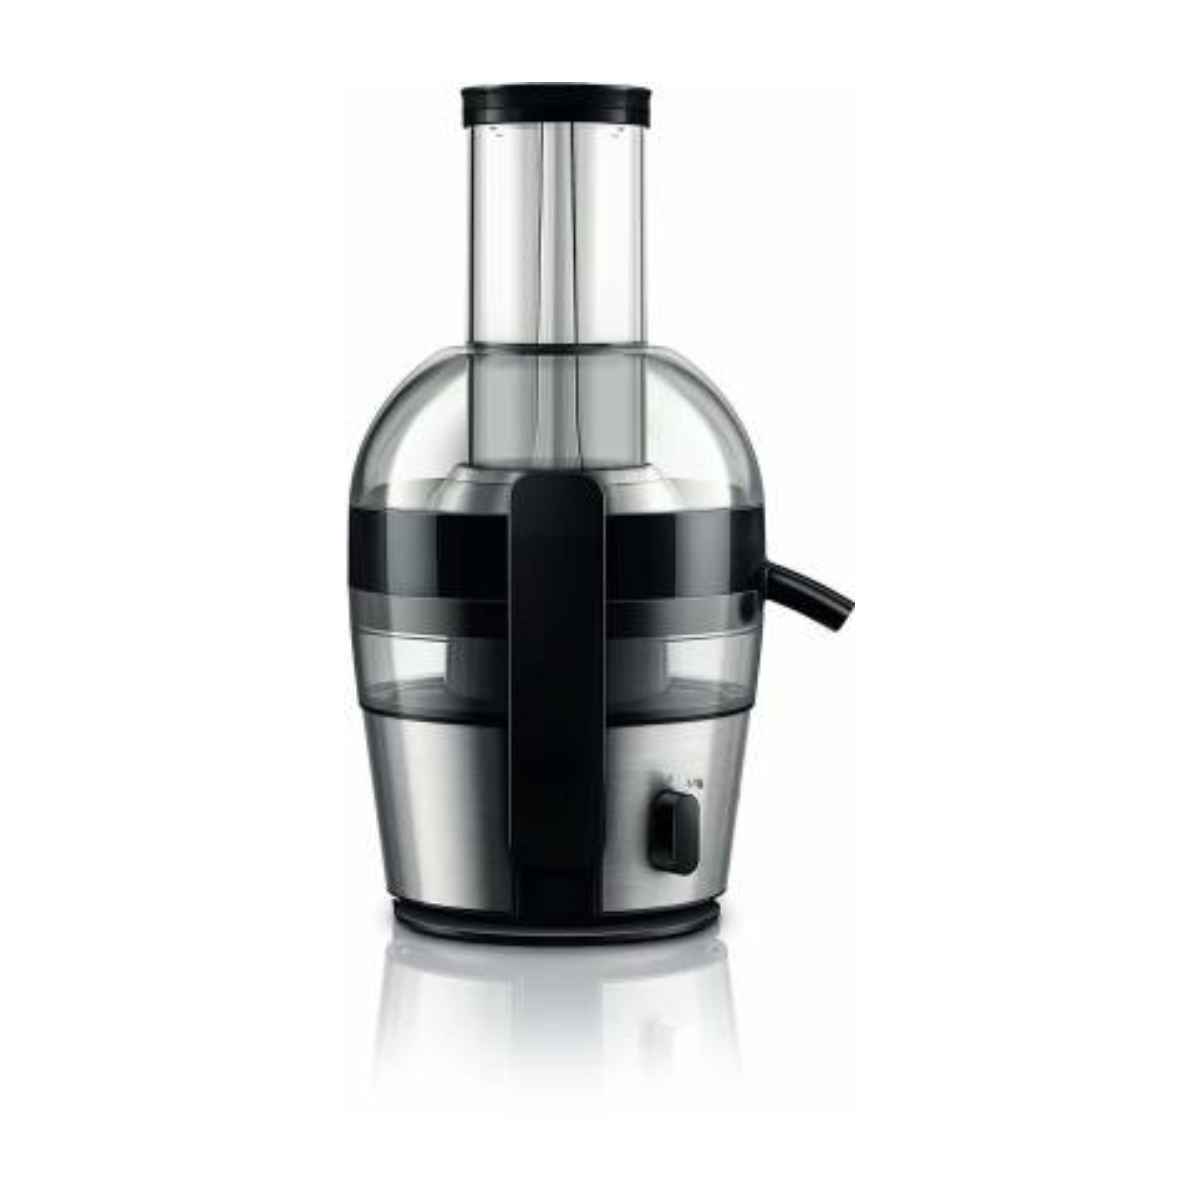 PHILIPS Viva Collection HR1863/20 800 W Juicer